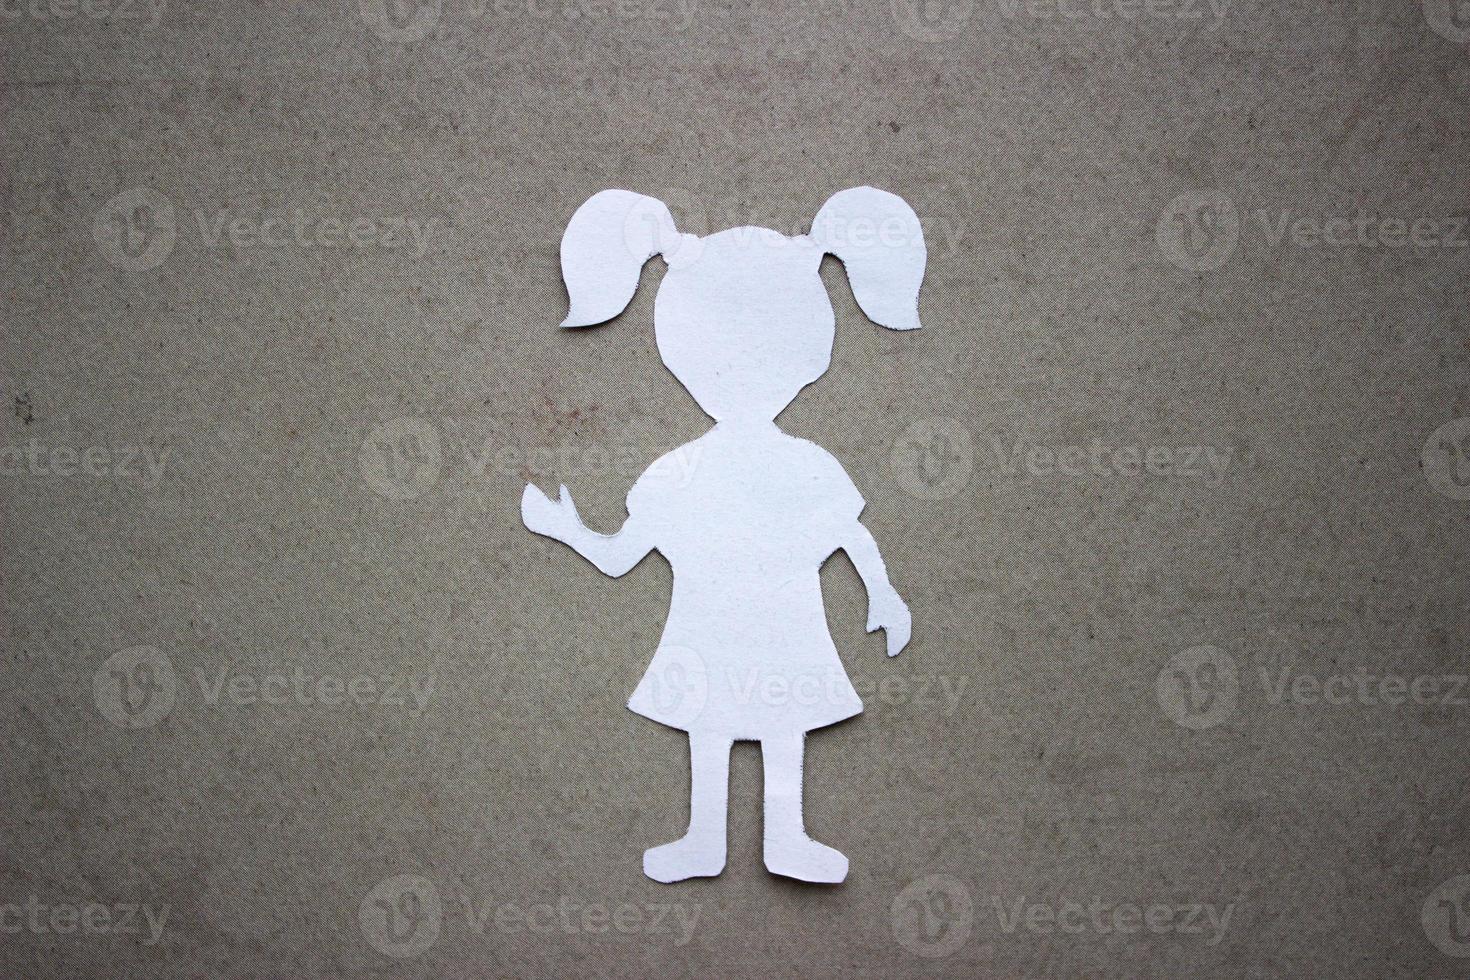 The form of a girl in a dress and with ponytails made of white paper, cut by hand. In the center of the photo